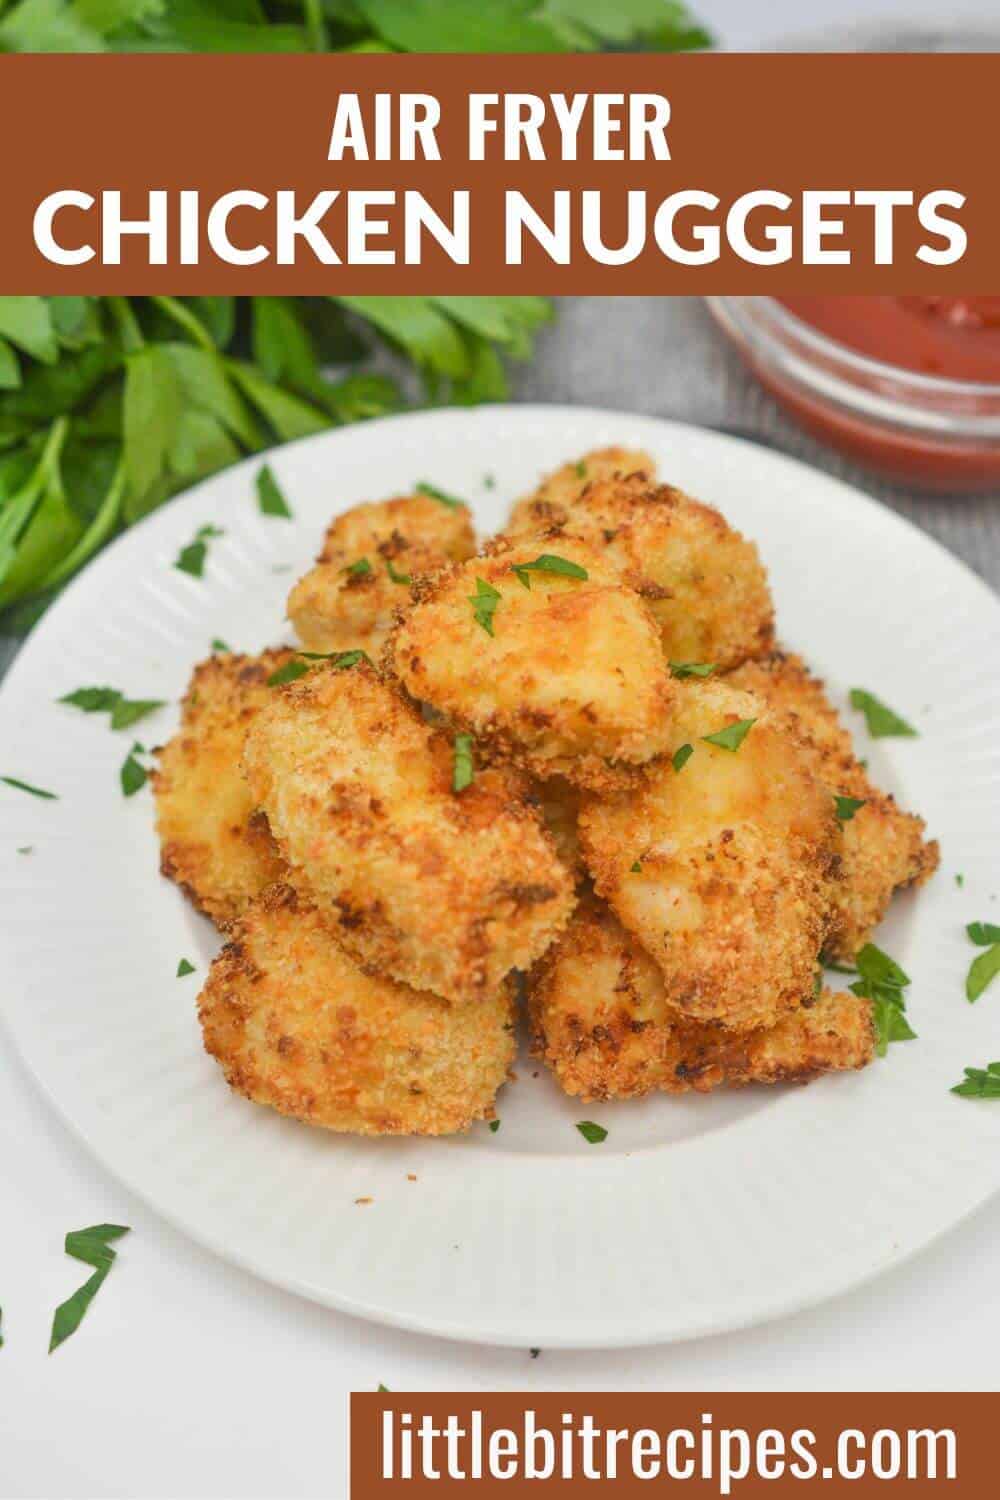 Air fryer chicken nuggets with text.